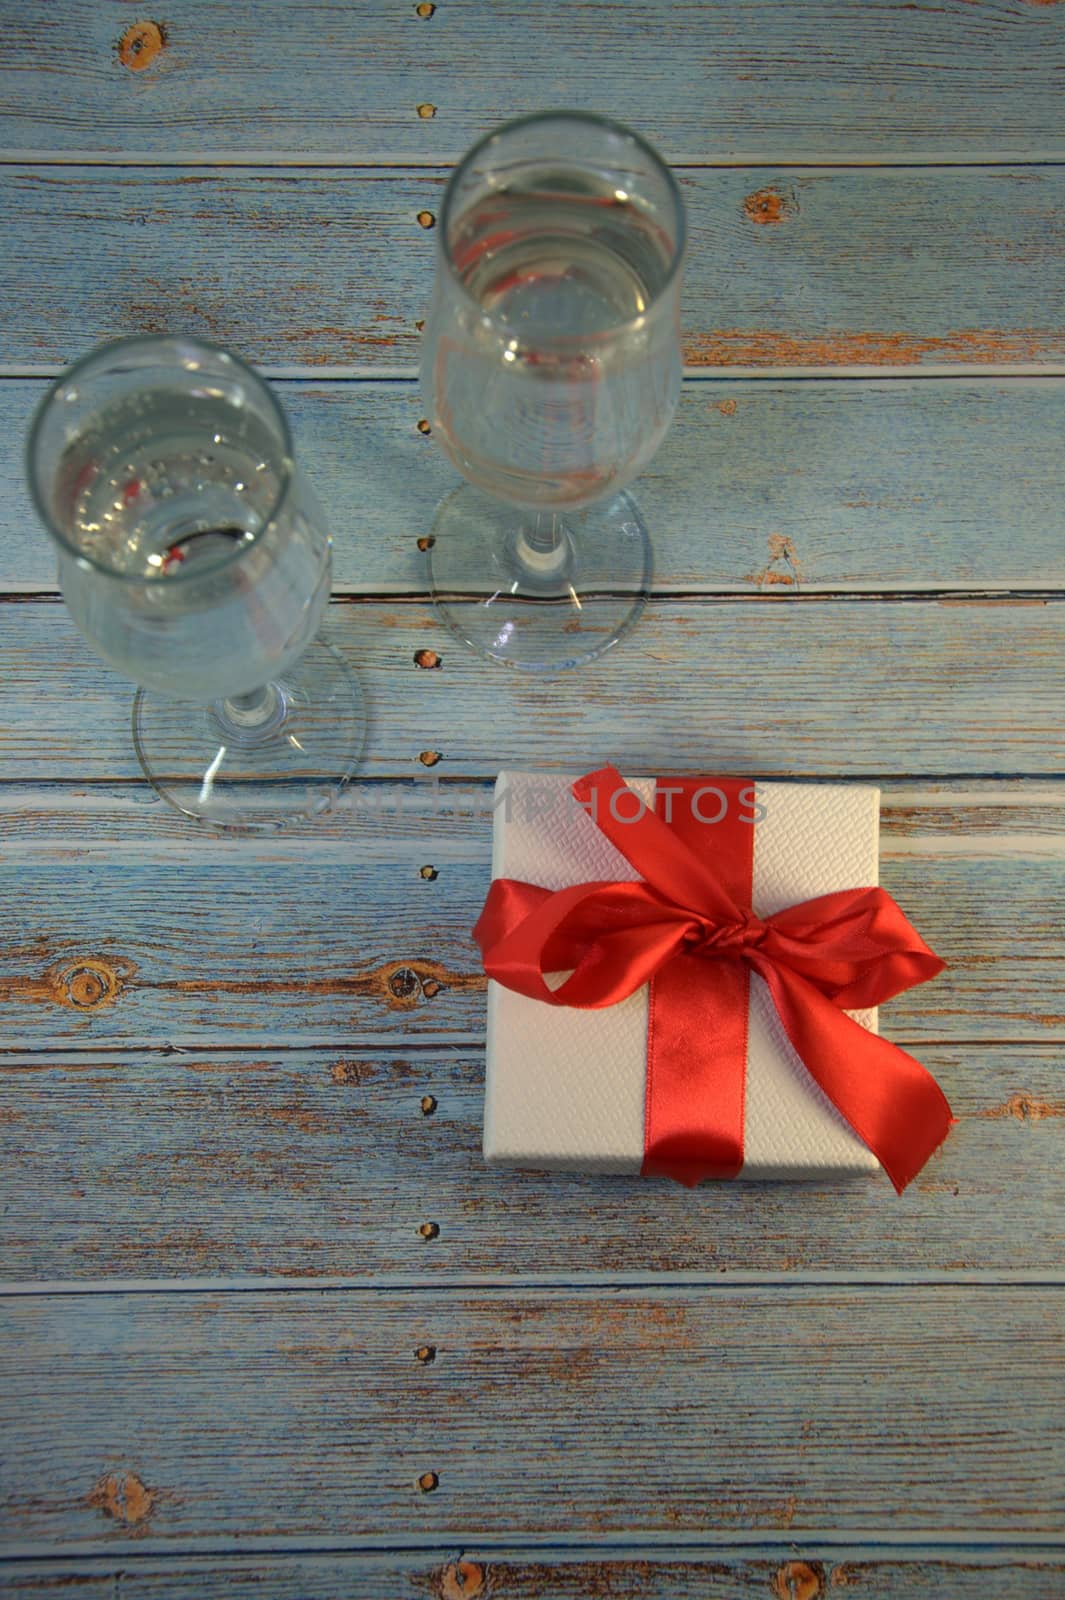 Two glasses with champagne and gift box with satin ribbon on a wooden table. Close-up.